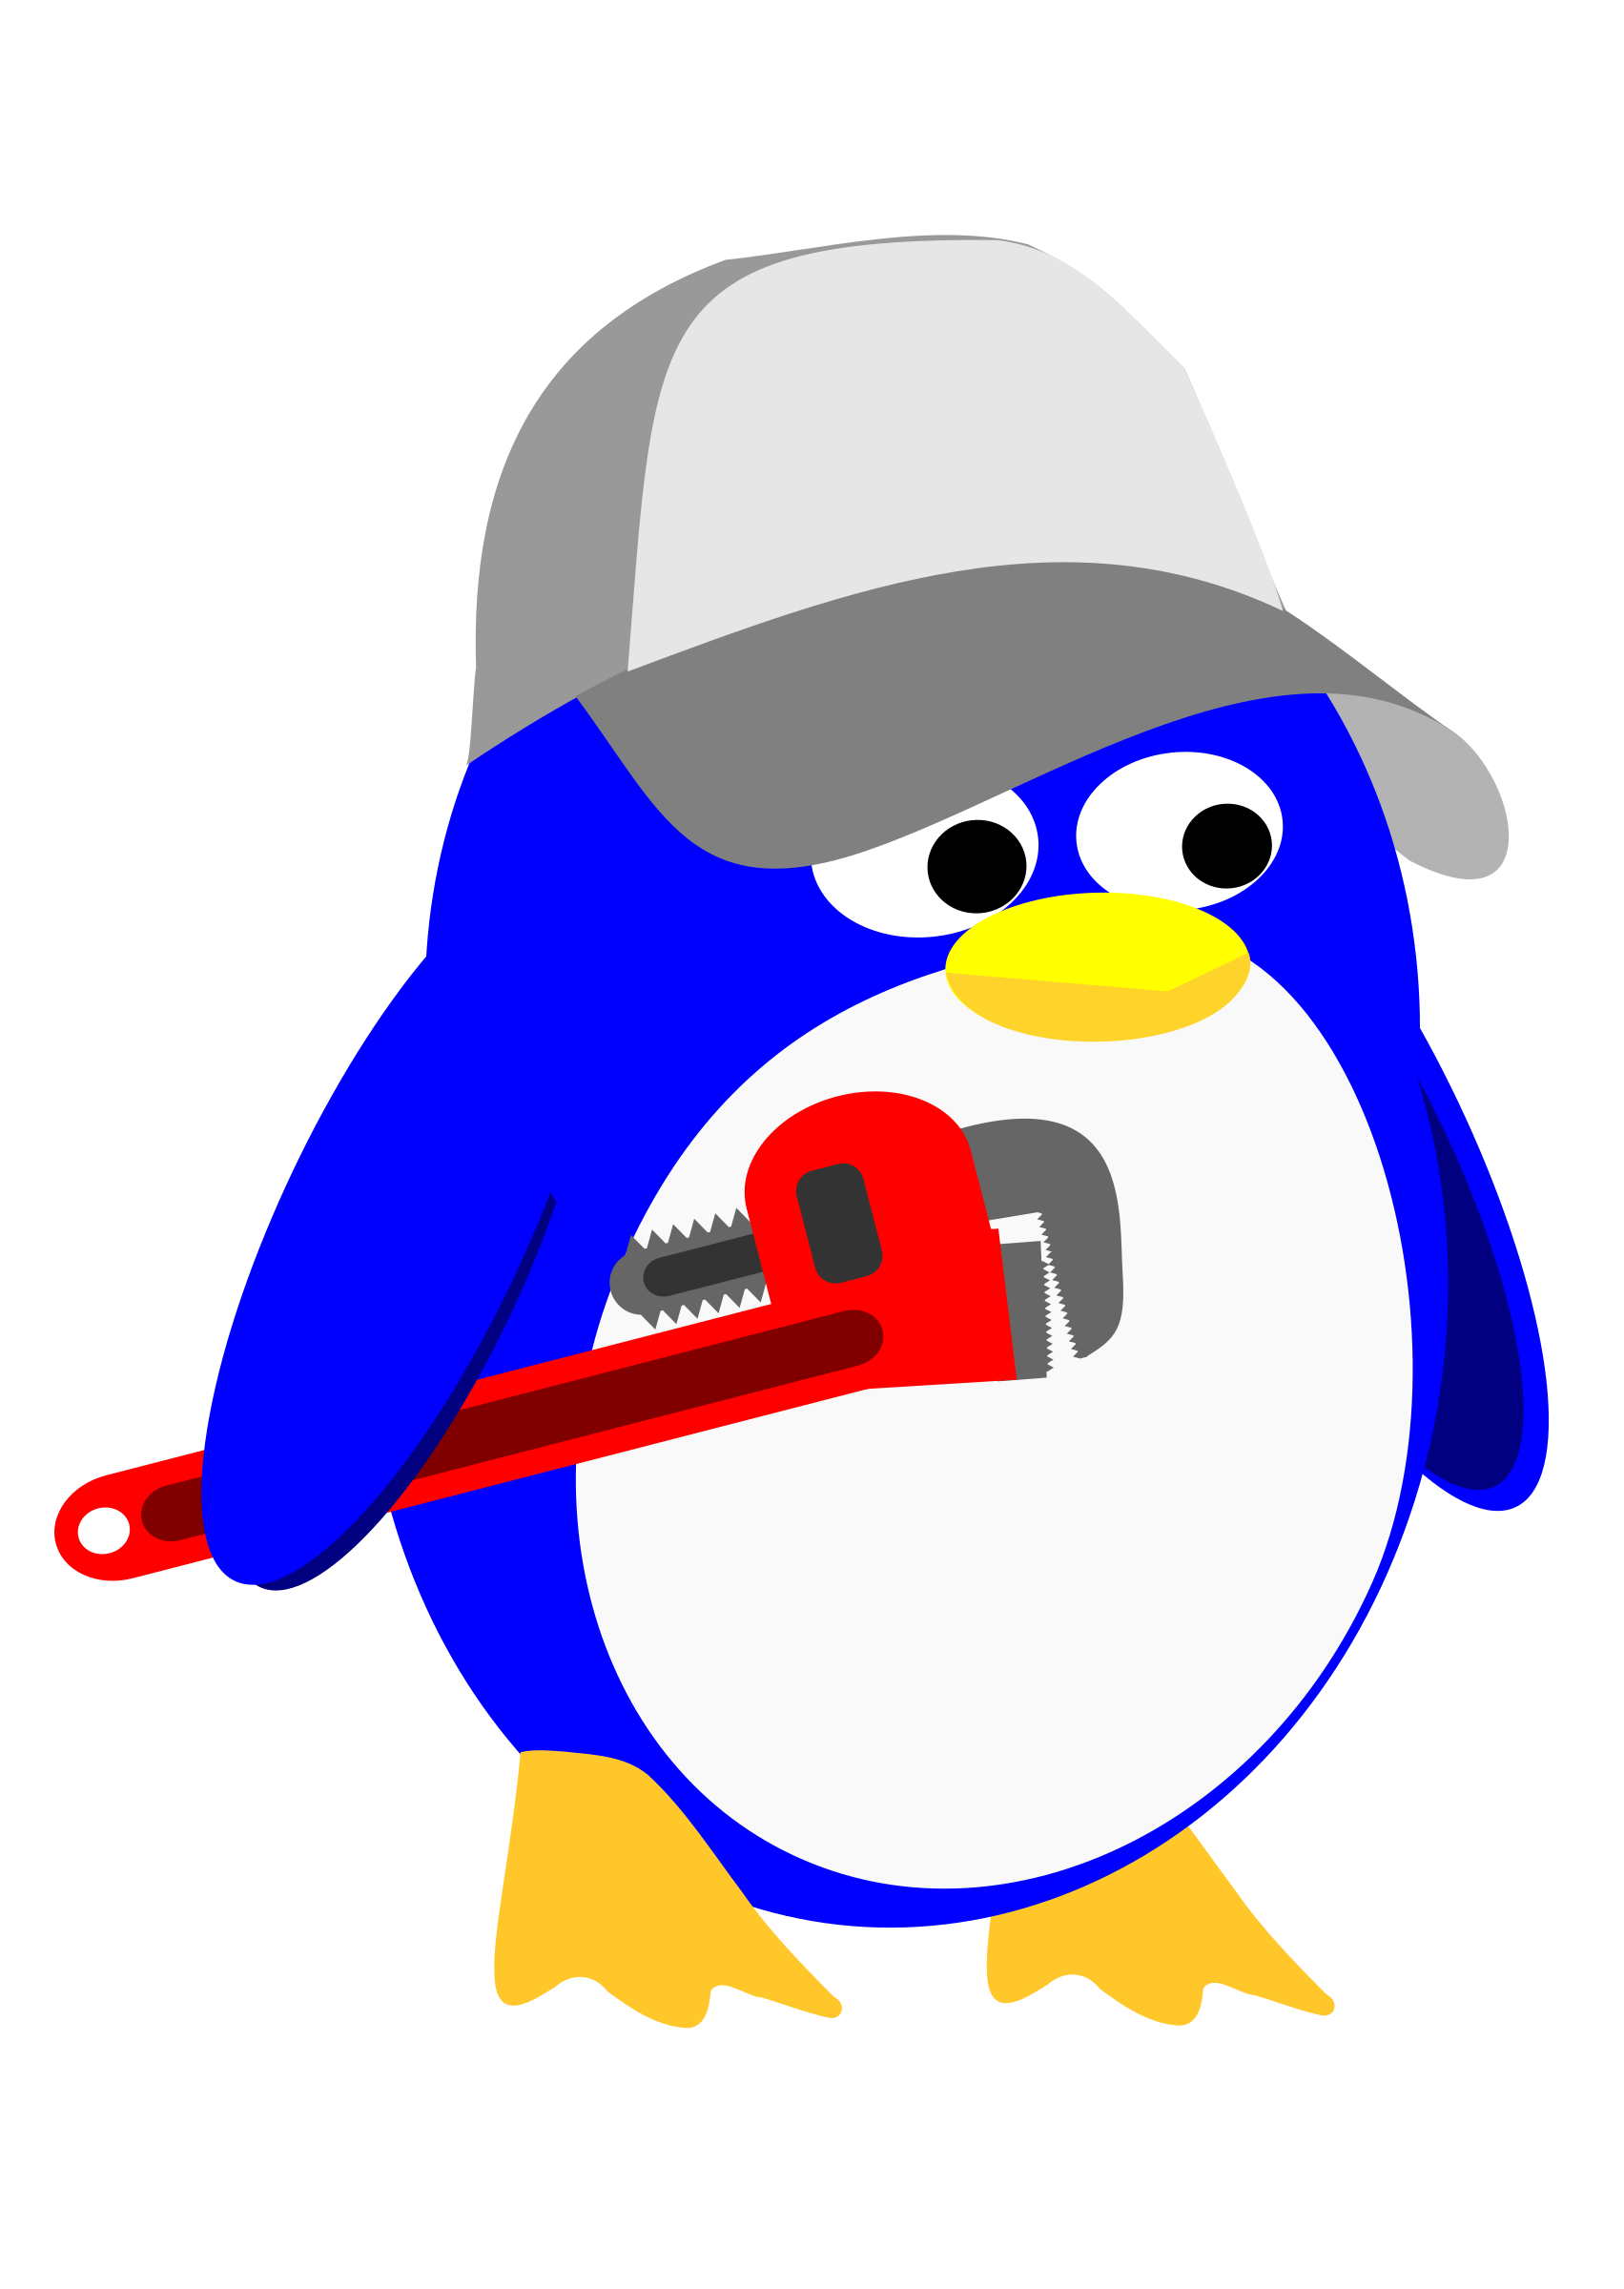 Plumber clipart icon. Penguin icons png free